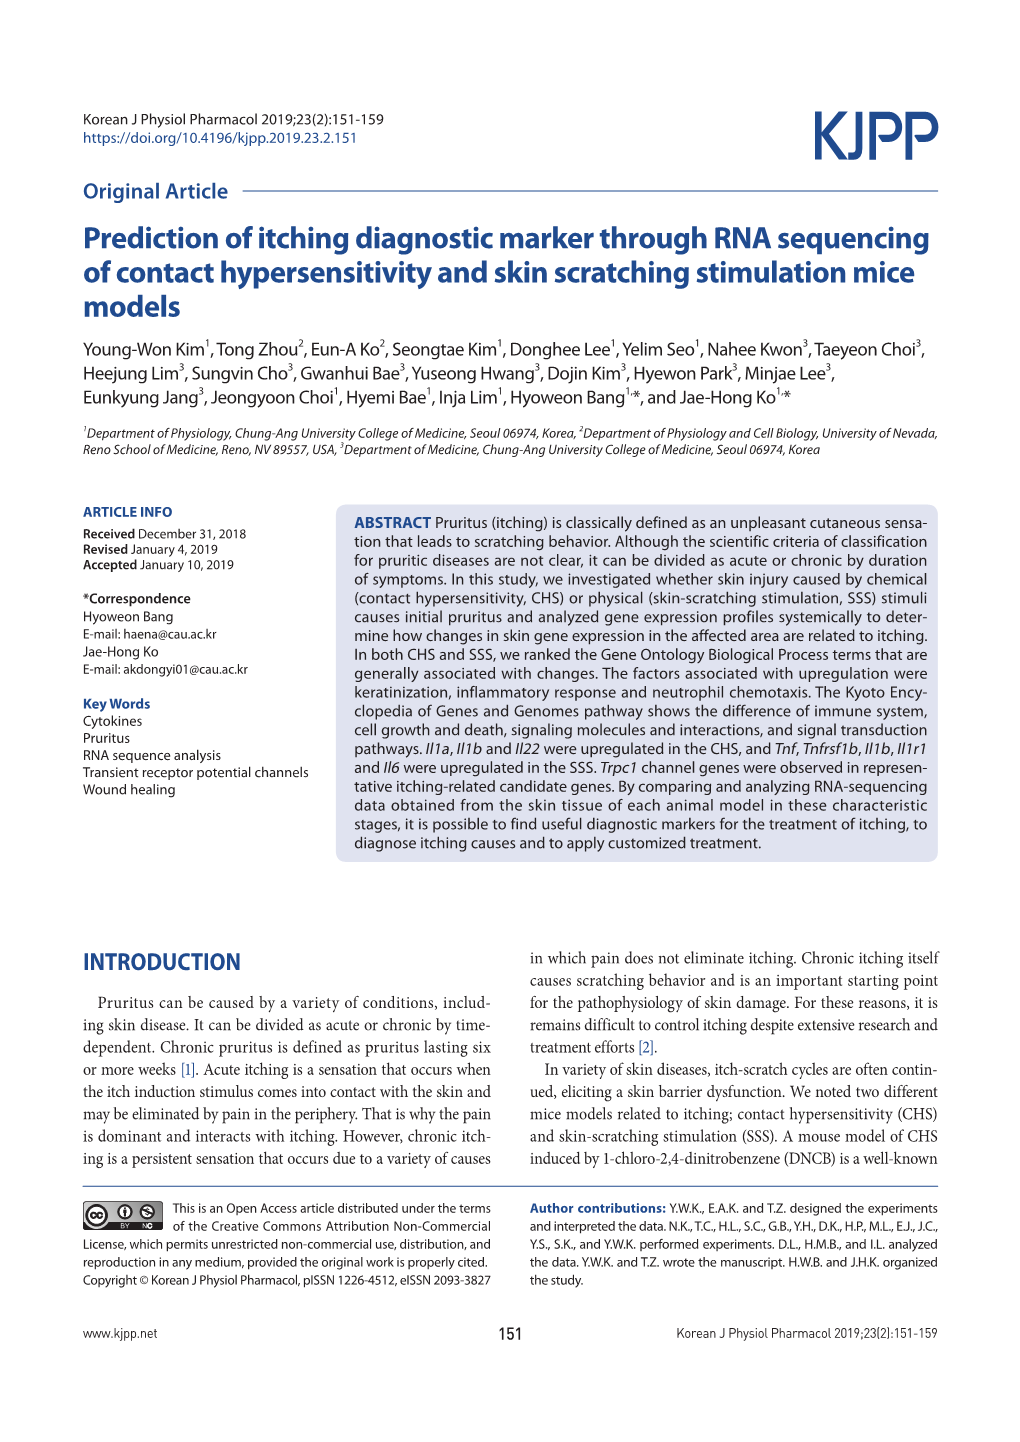 Prediction of Itching Diagnostic Marker Through RNA Sequencing of Contact Hypersensitivity and Skin Scratching Stimulation Mice Models